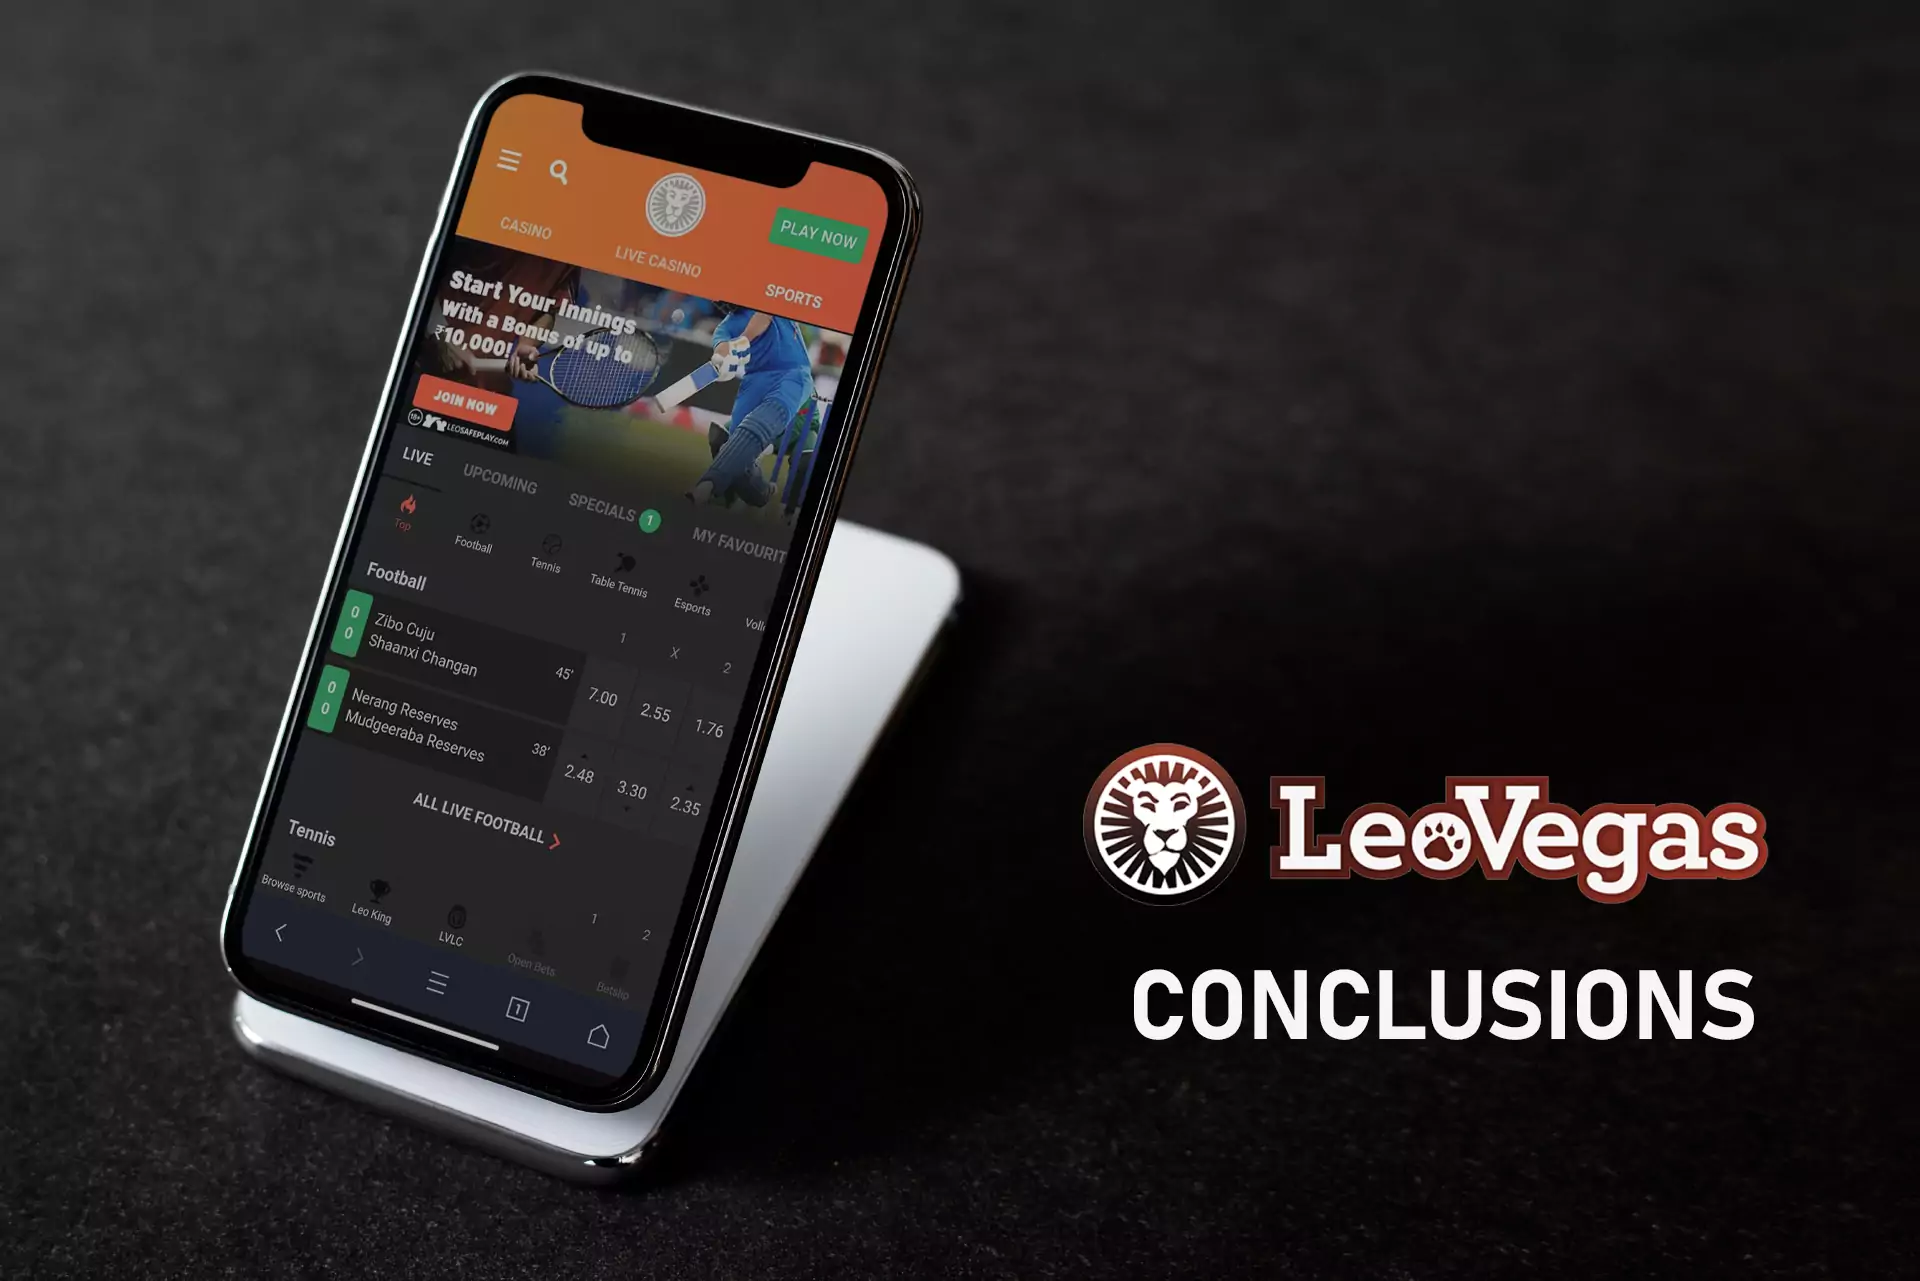 Read the conclusions about the quality of the LeoVegas app for Android and iOS.